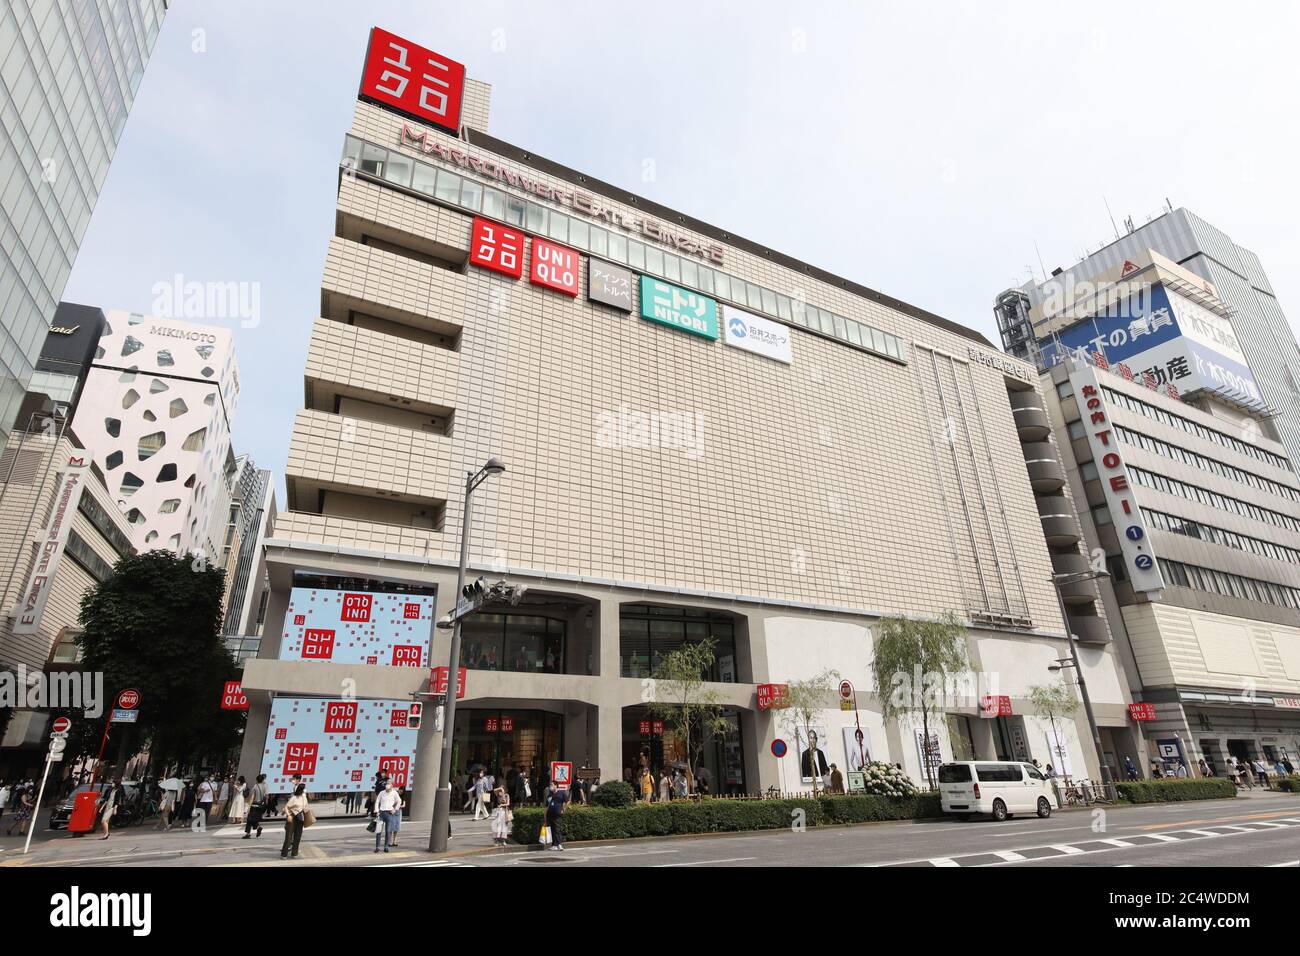 Uniqlo maps out a way to dominate differently  Nikkei Asia